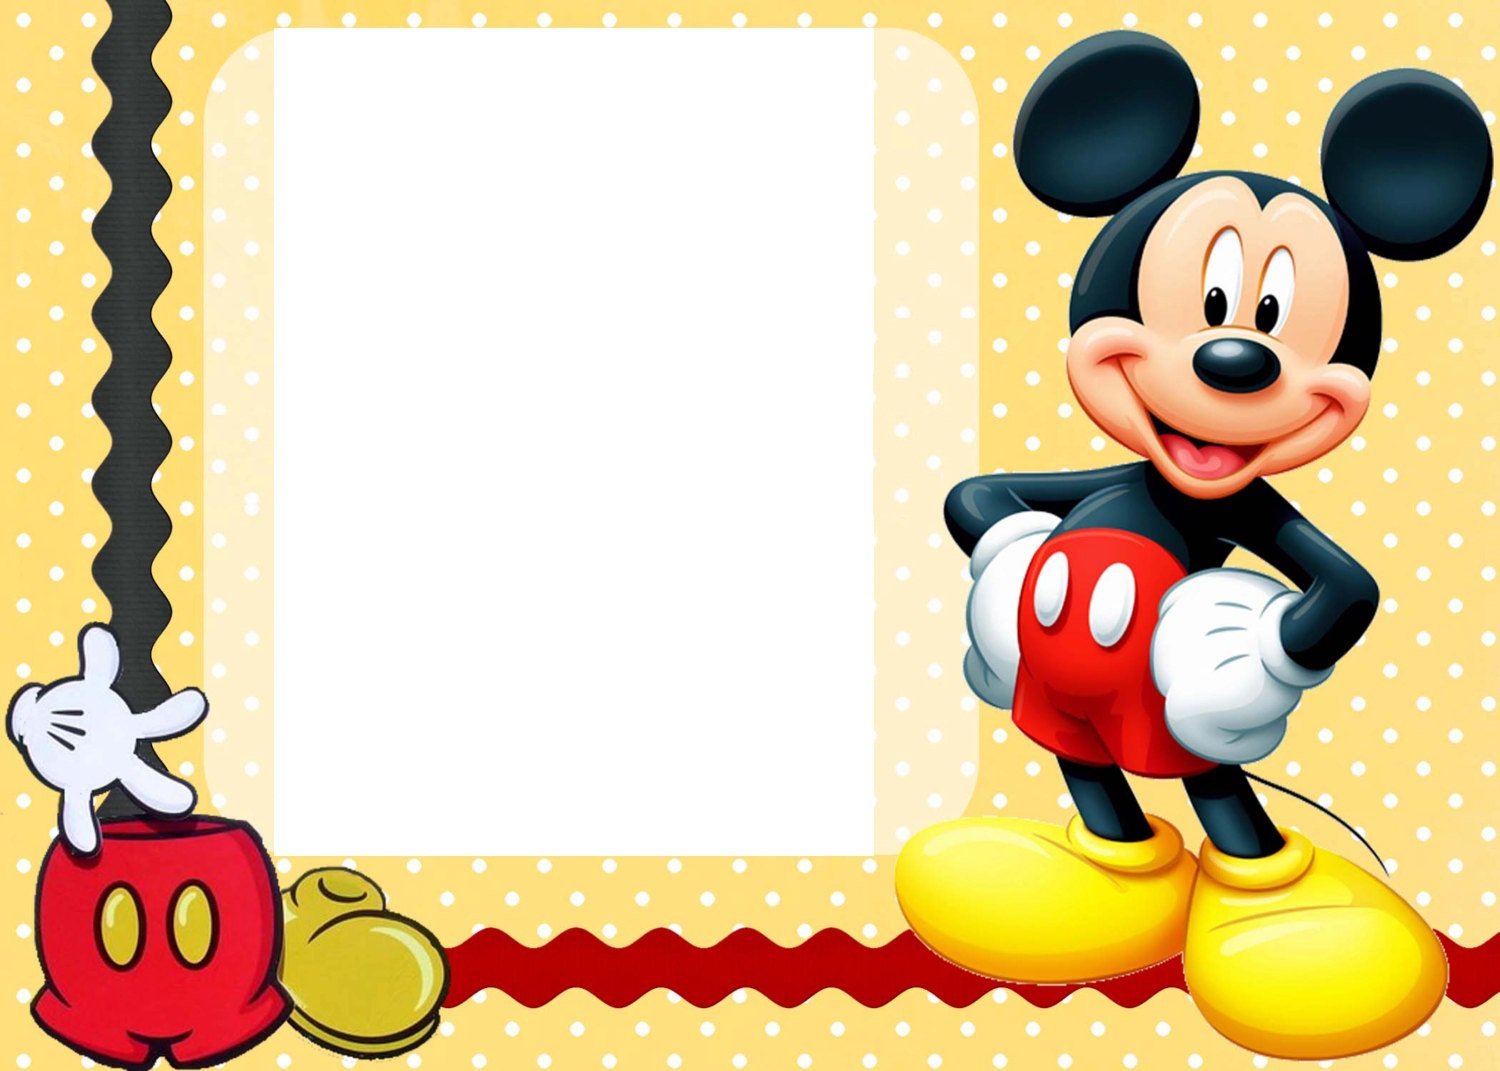 Mickey Mouse Clubhouse Party Invitations